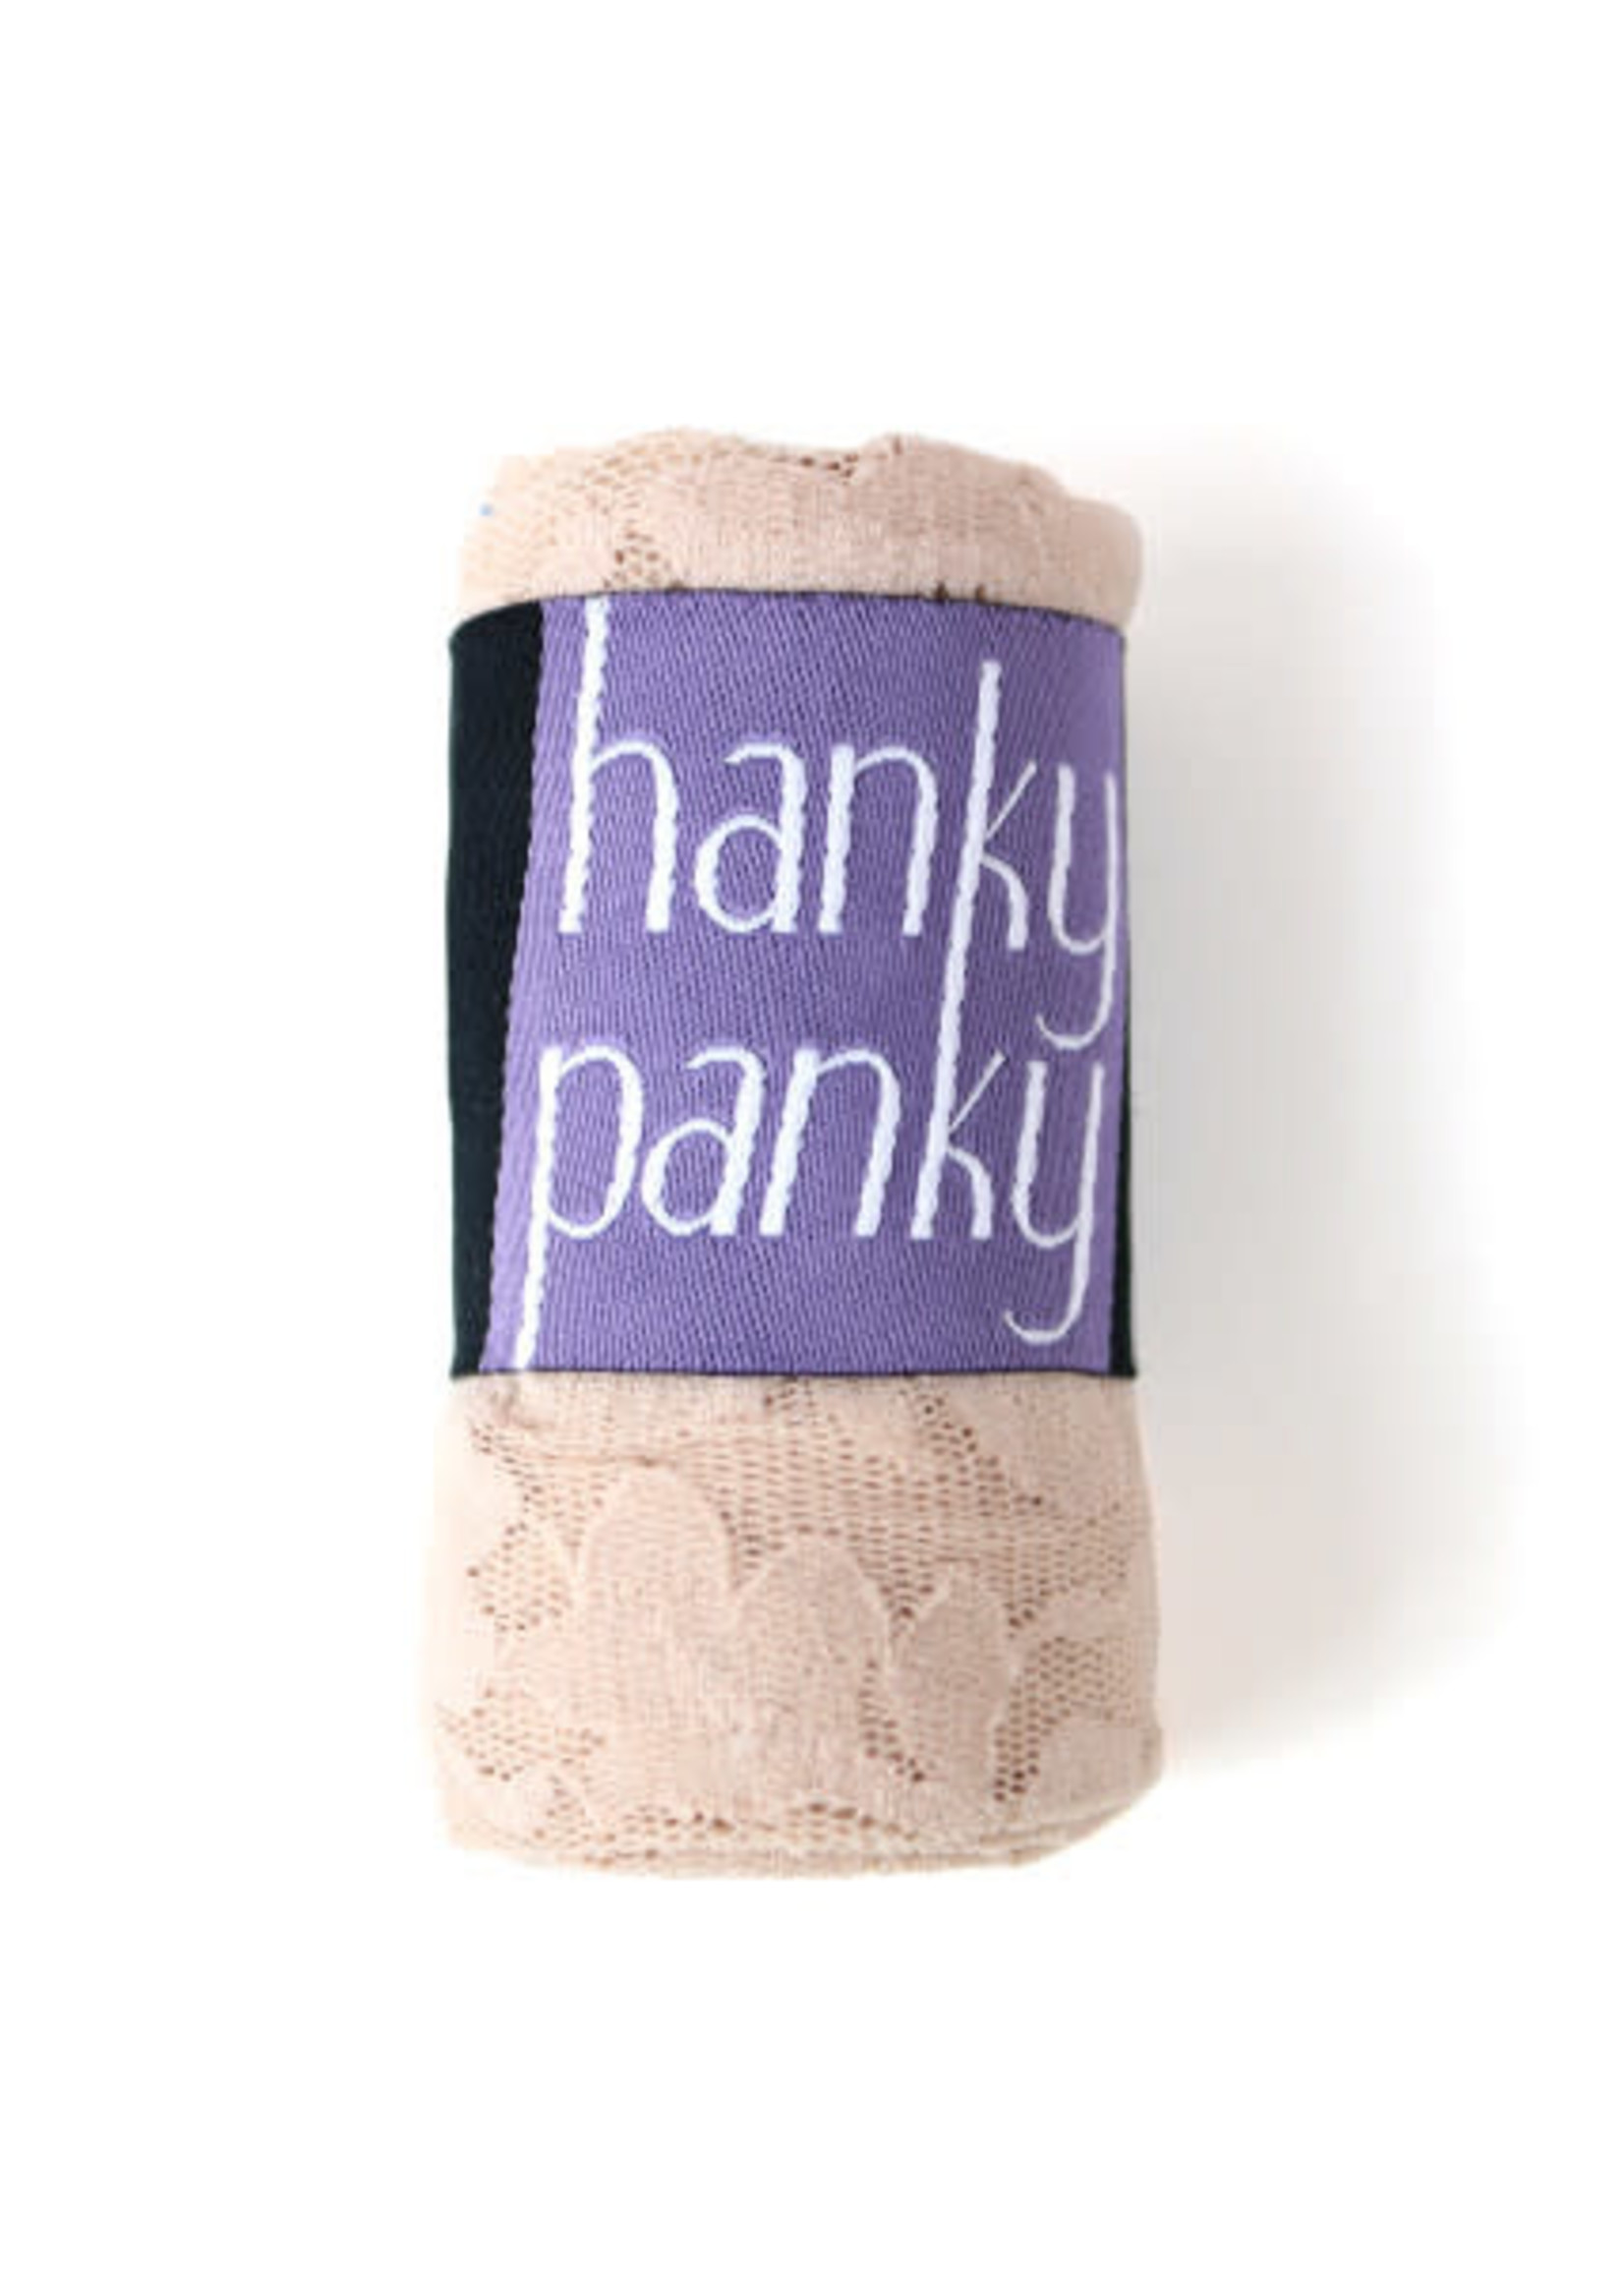 Hanky Panky Rolled Signature Lace Original Rise Thong - Chai